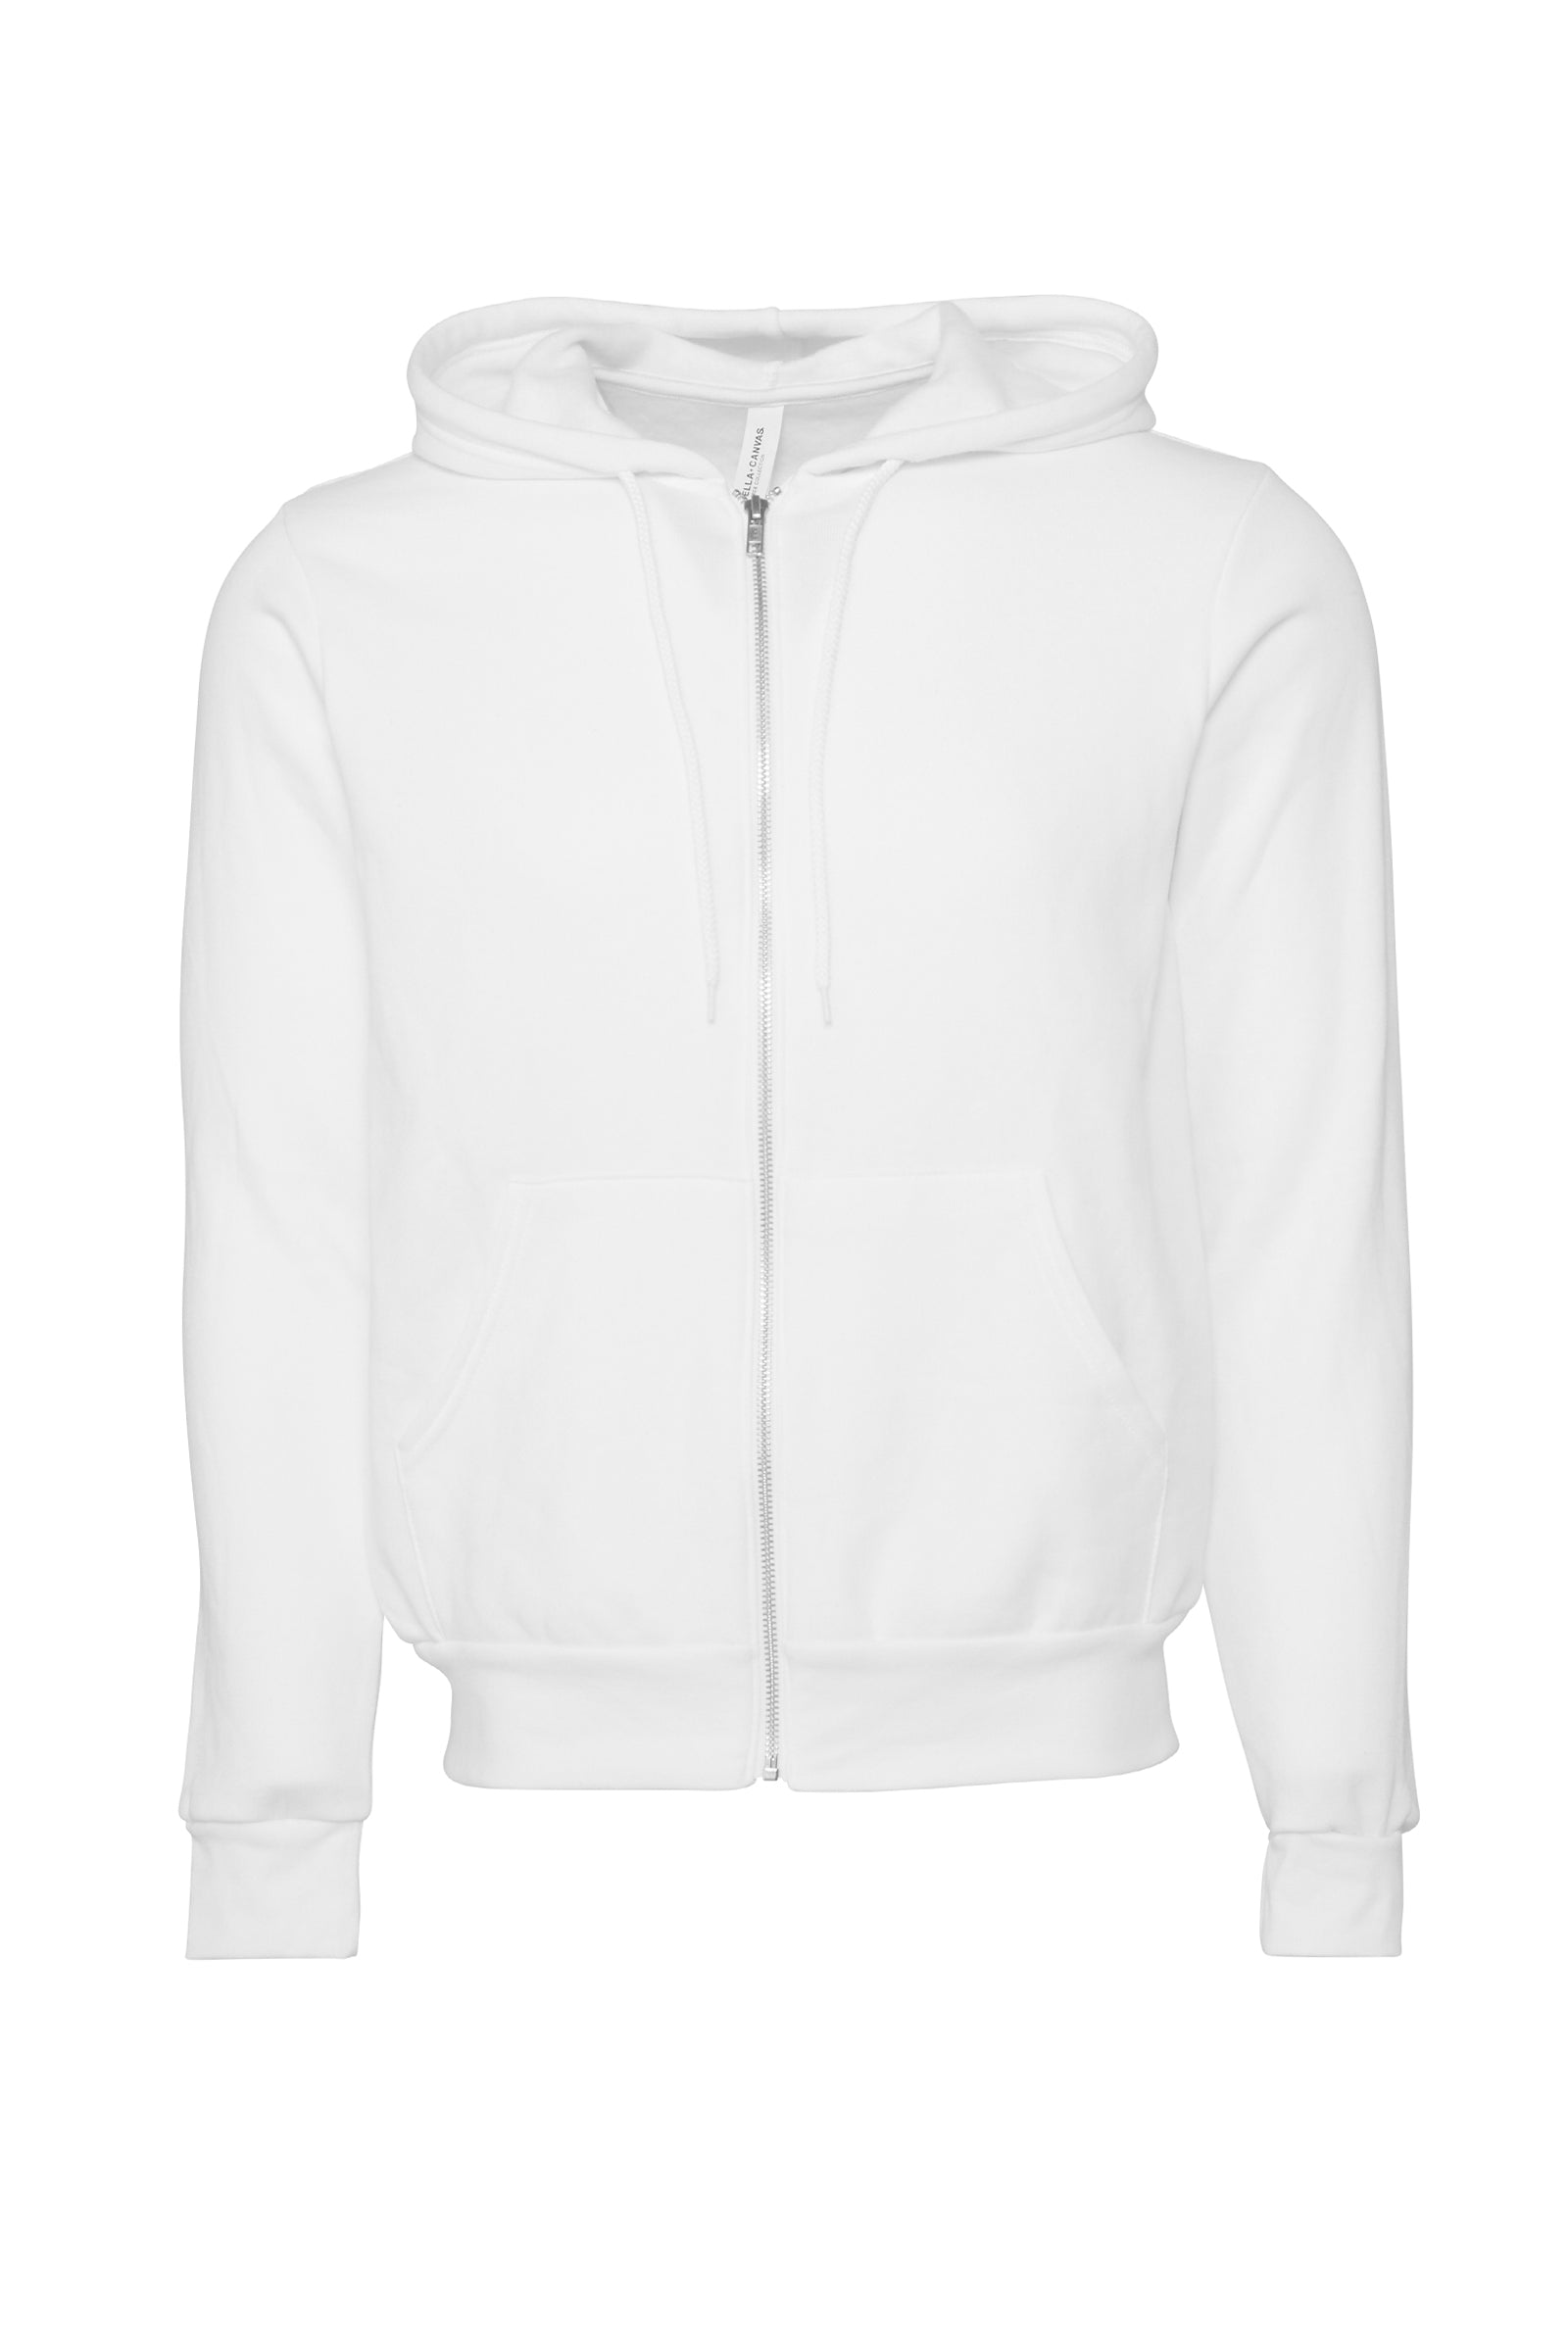 COURAGE TO RISE ZIP UP HOODIE